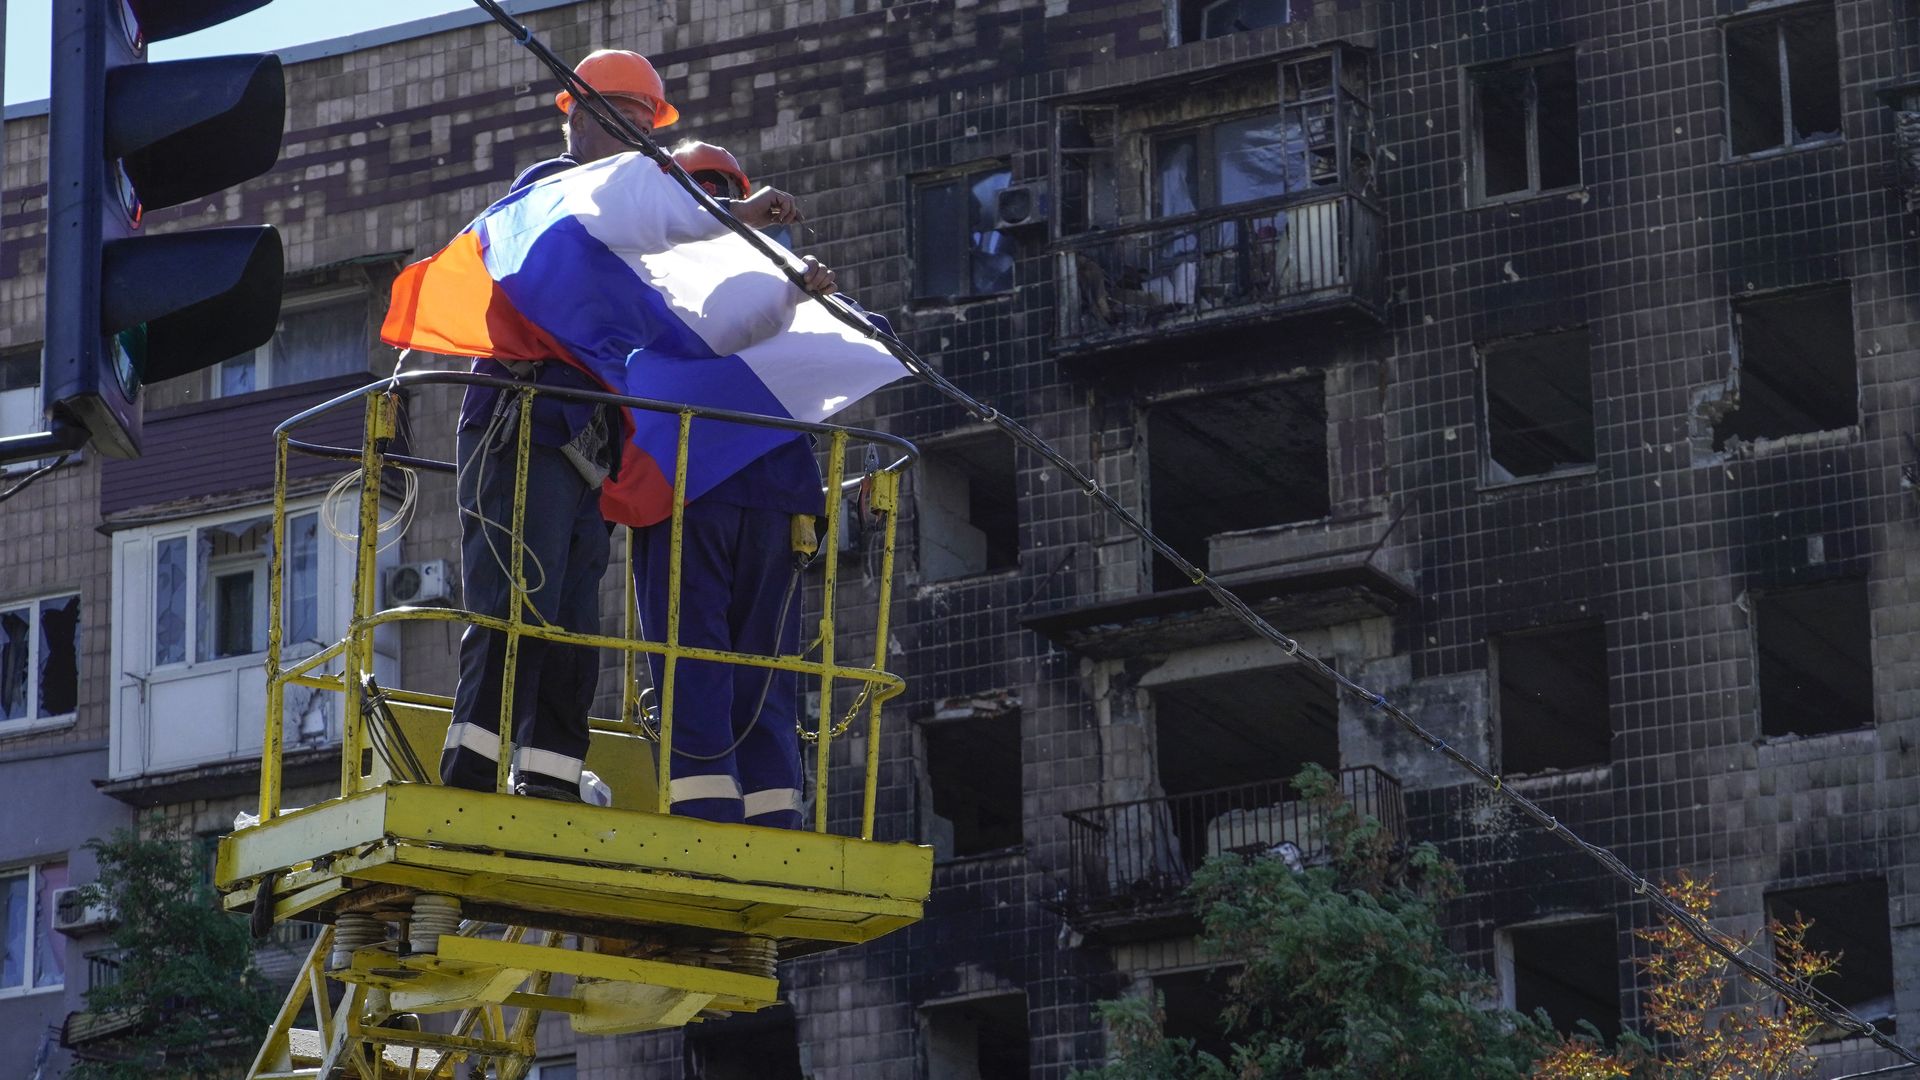  Workers fix a Russian national flag on wires with a damaged building in the background in Mariupol on September 25.